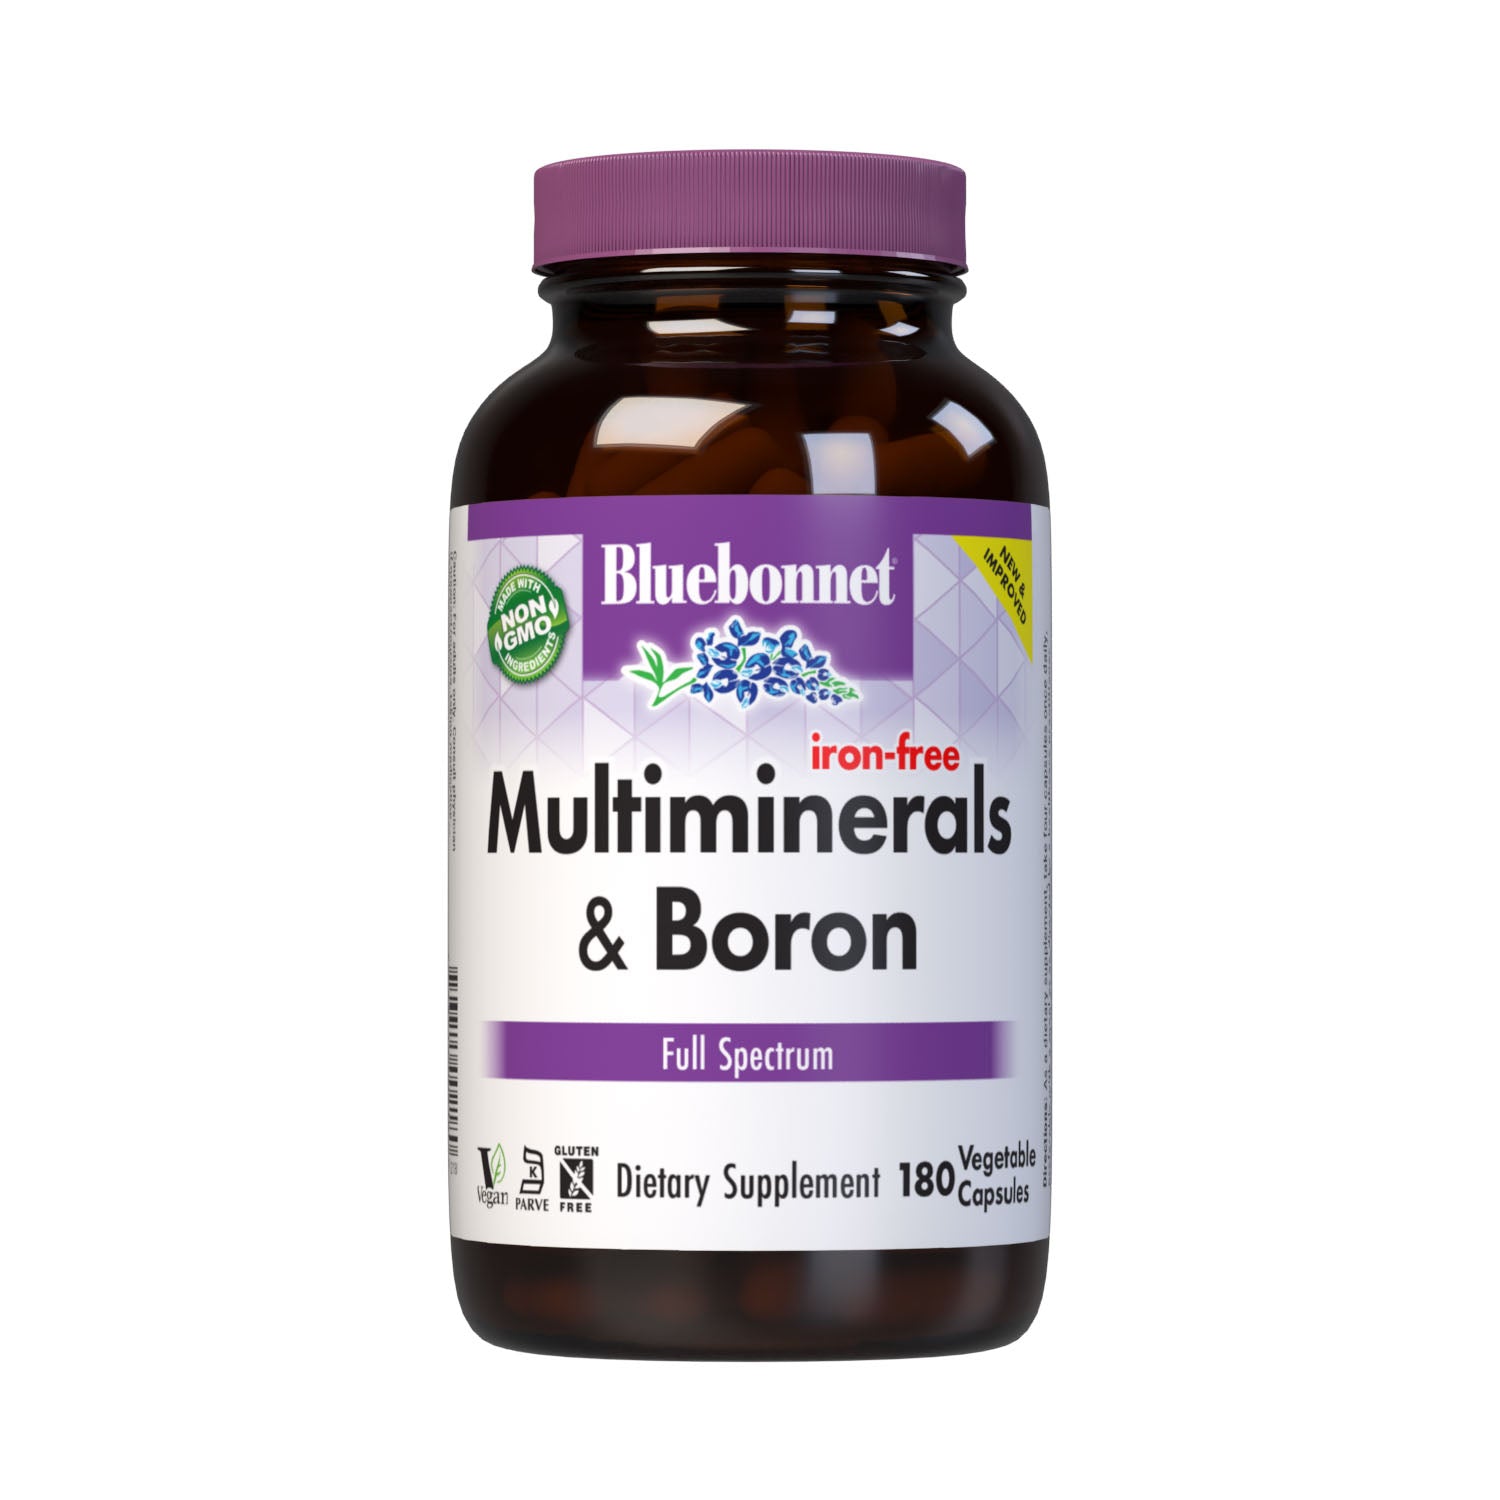 Bluebonnet’s Iron-Free Multiminerals & Boron (iron-free) 180 Vegetable Capsules are formulated with advanced chelating agents, including: aspartates, citrates, picolinates and histidinates for bone health. #size_180 count